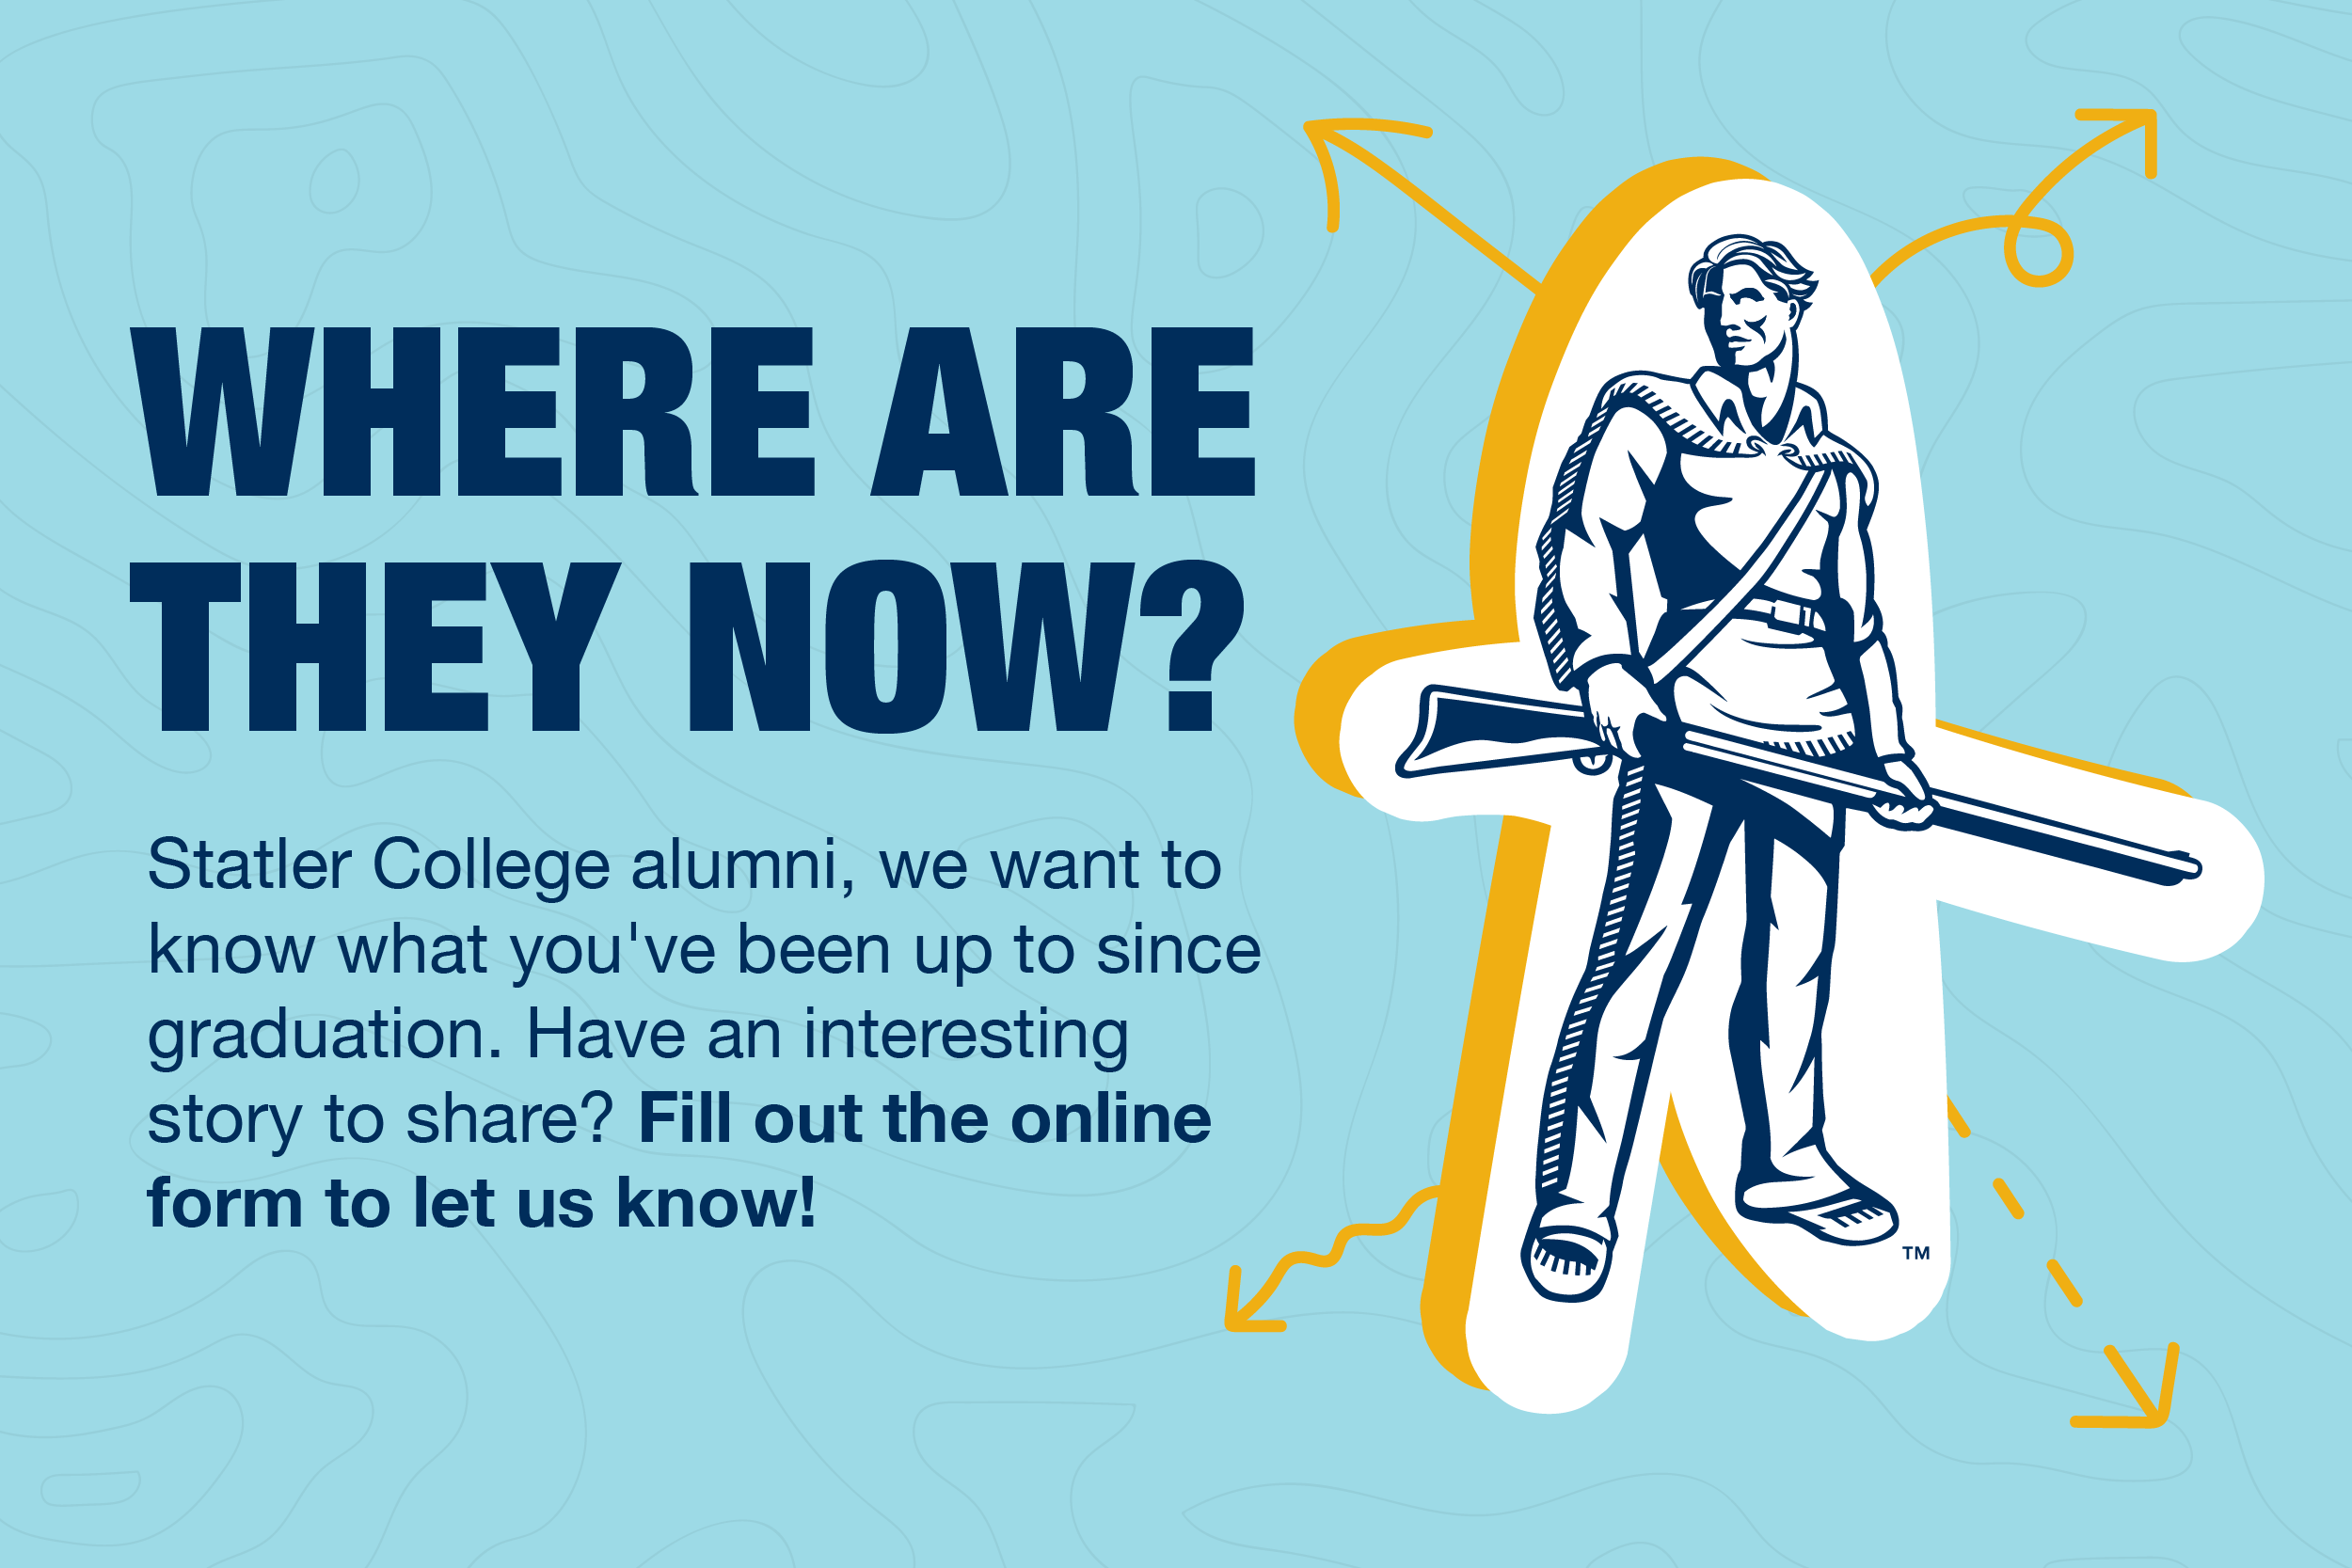 Where are they now? Statler College alumni, we want to know what you've been up to since graduation. Have an interesting story to share? Fill out the online form to let us know!